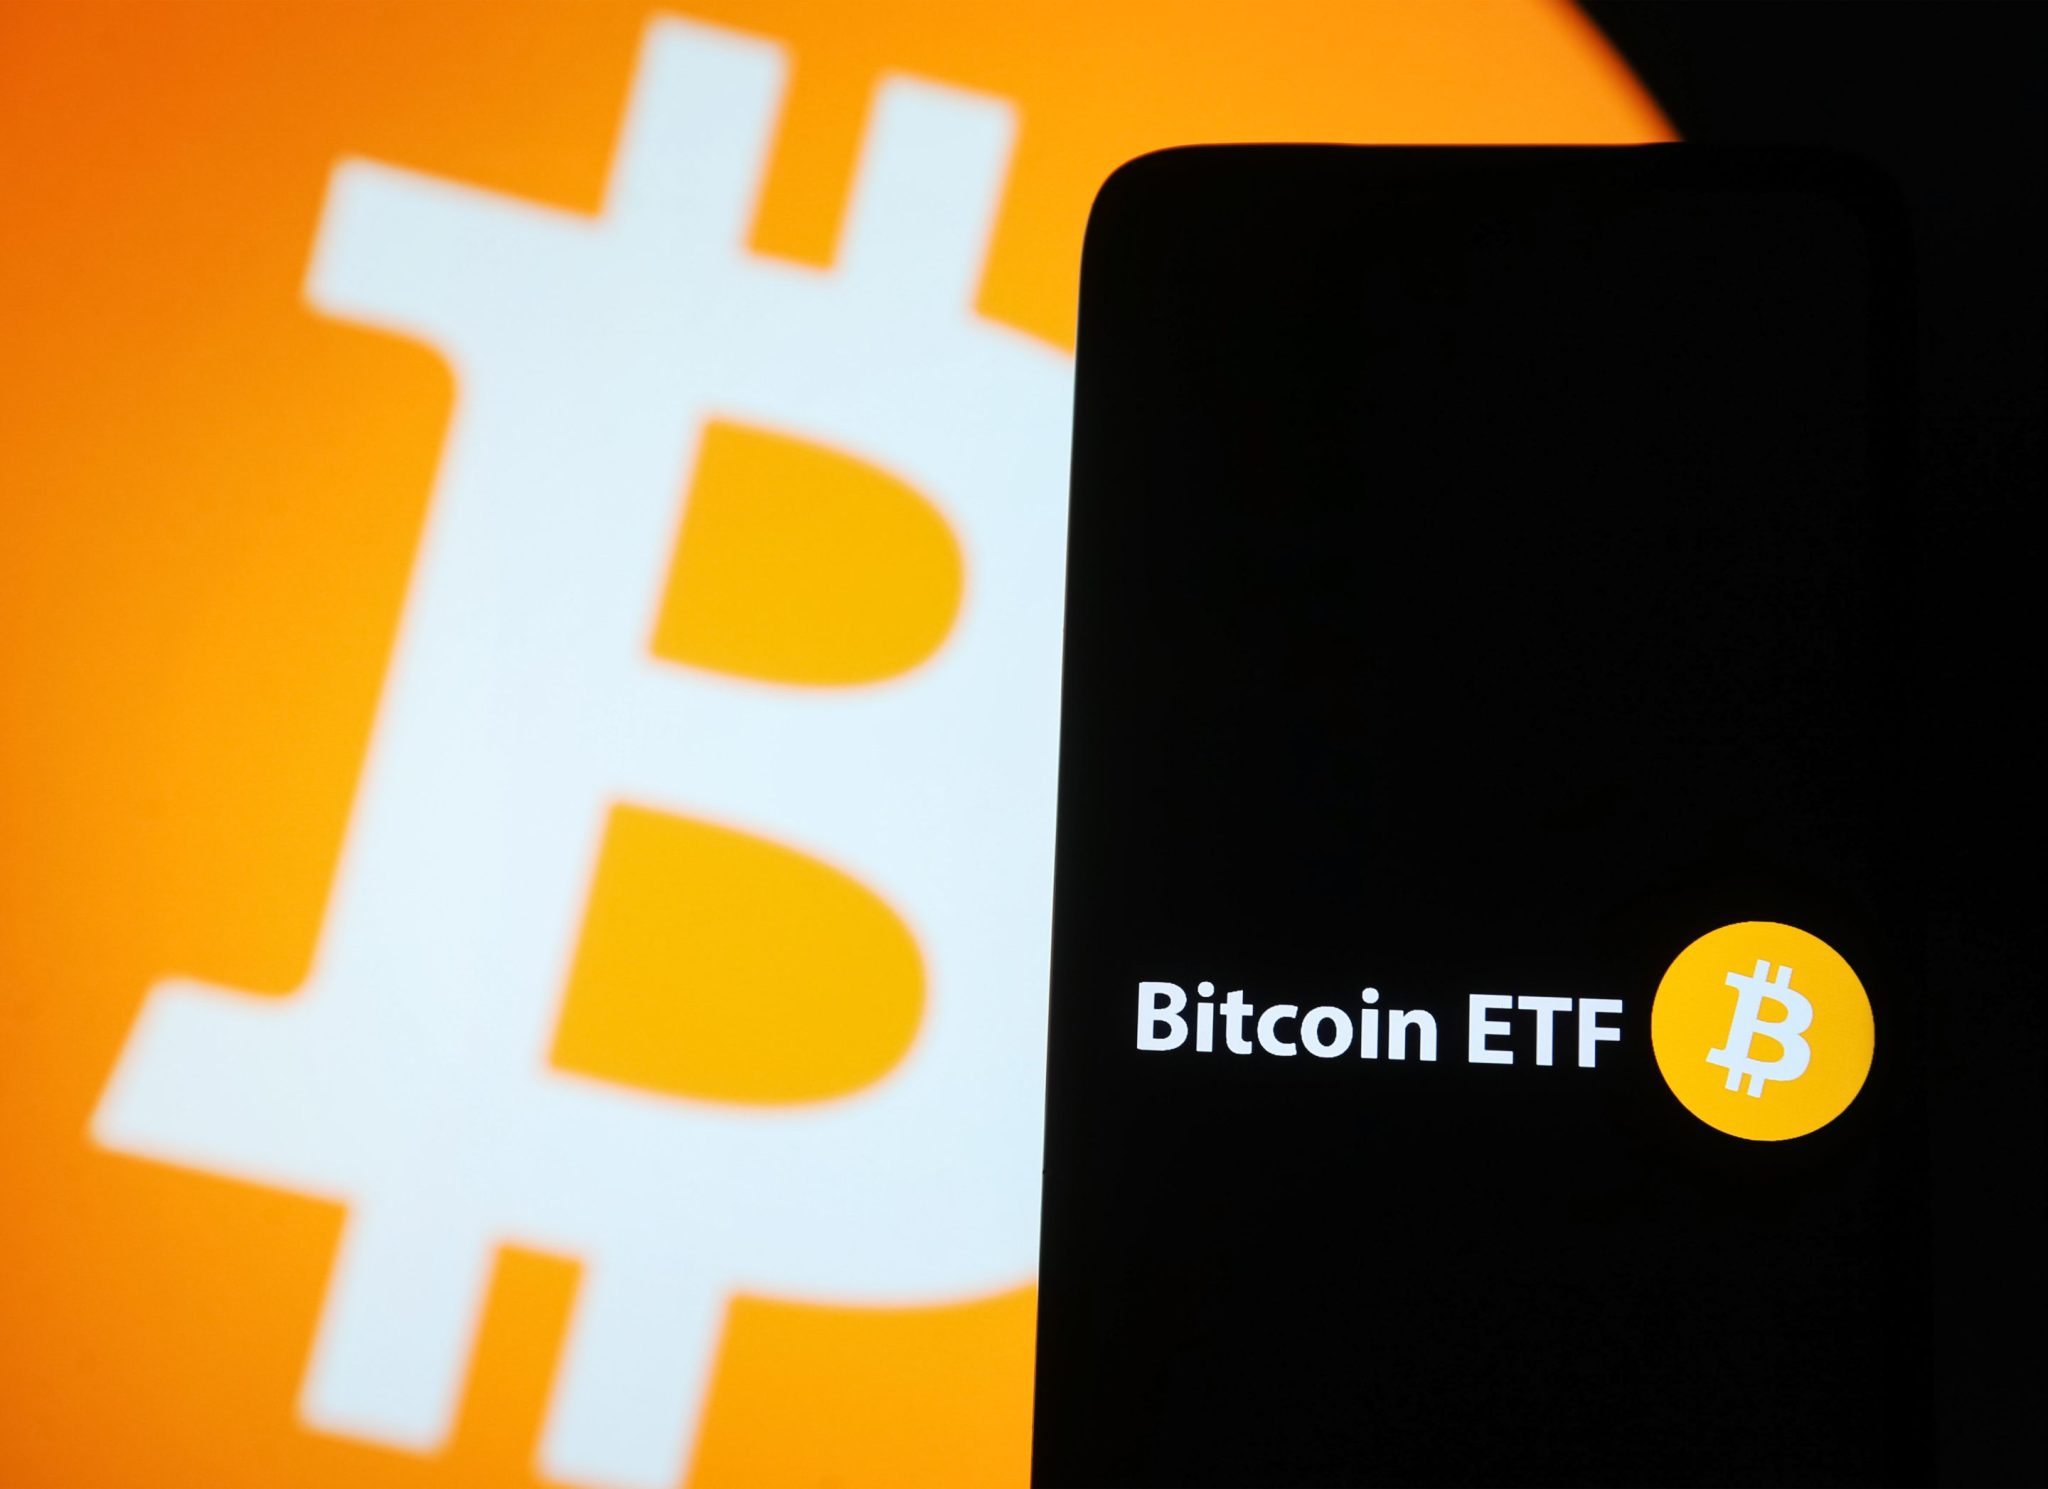 Bitcoin ETFs see record 3-day outflow as retail investors ‘dart in and out of positions’